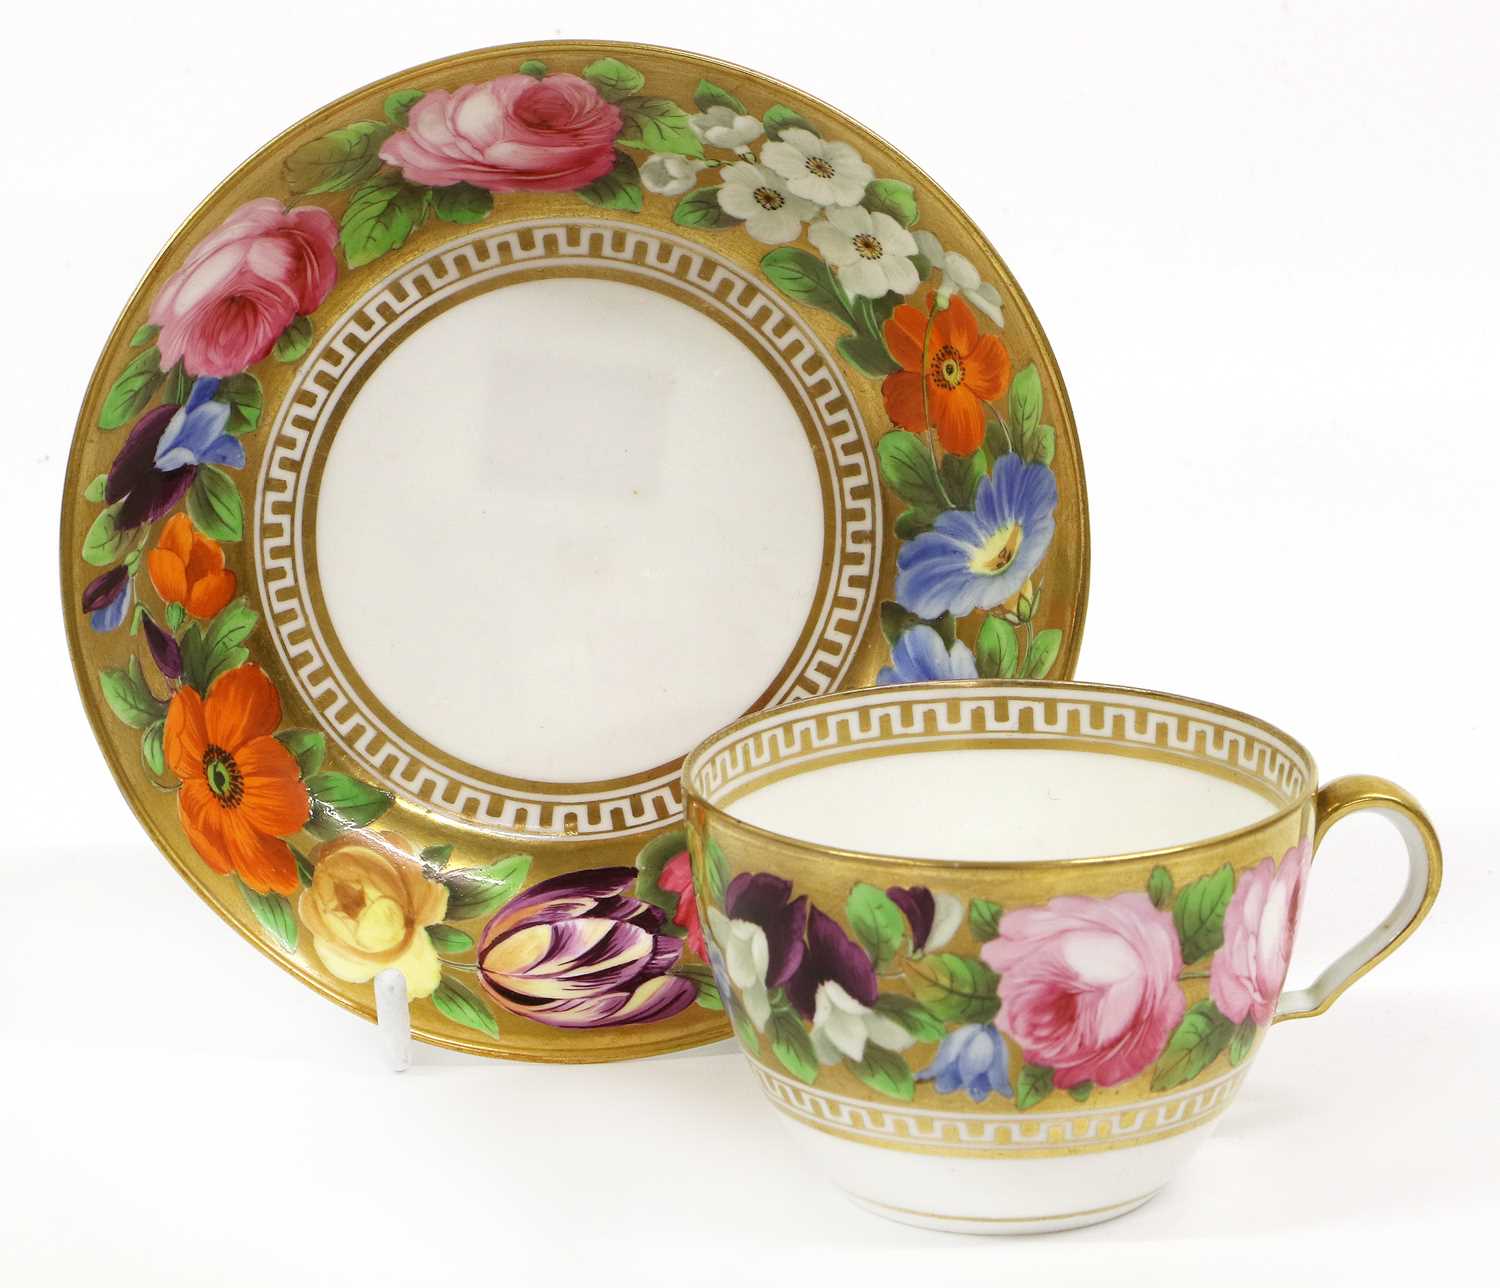 A Spode Teacup and Saucer, circa 1810, of bute shape, gilt ground and painted with large flowers - Image 3 of 5